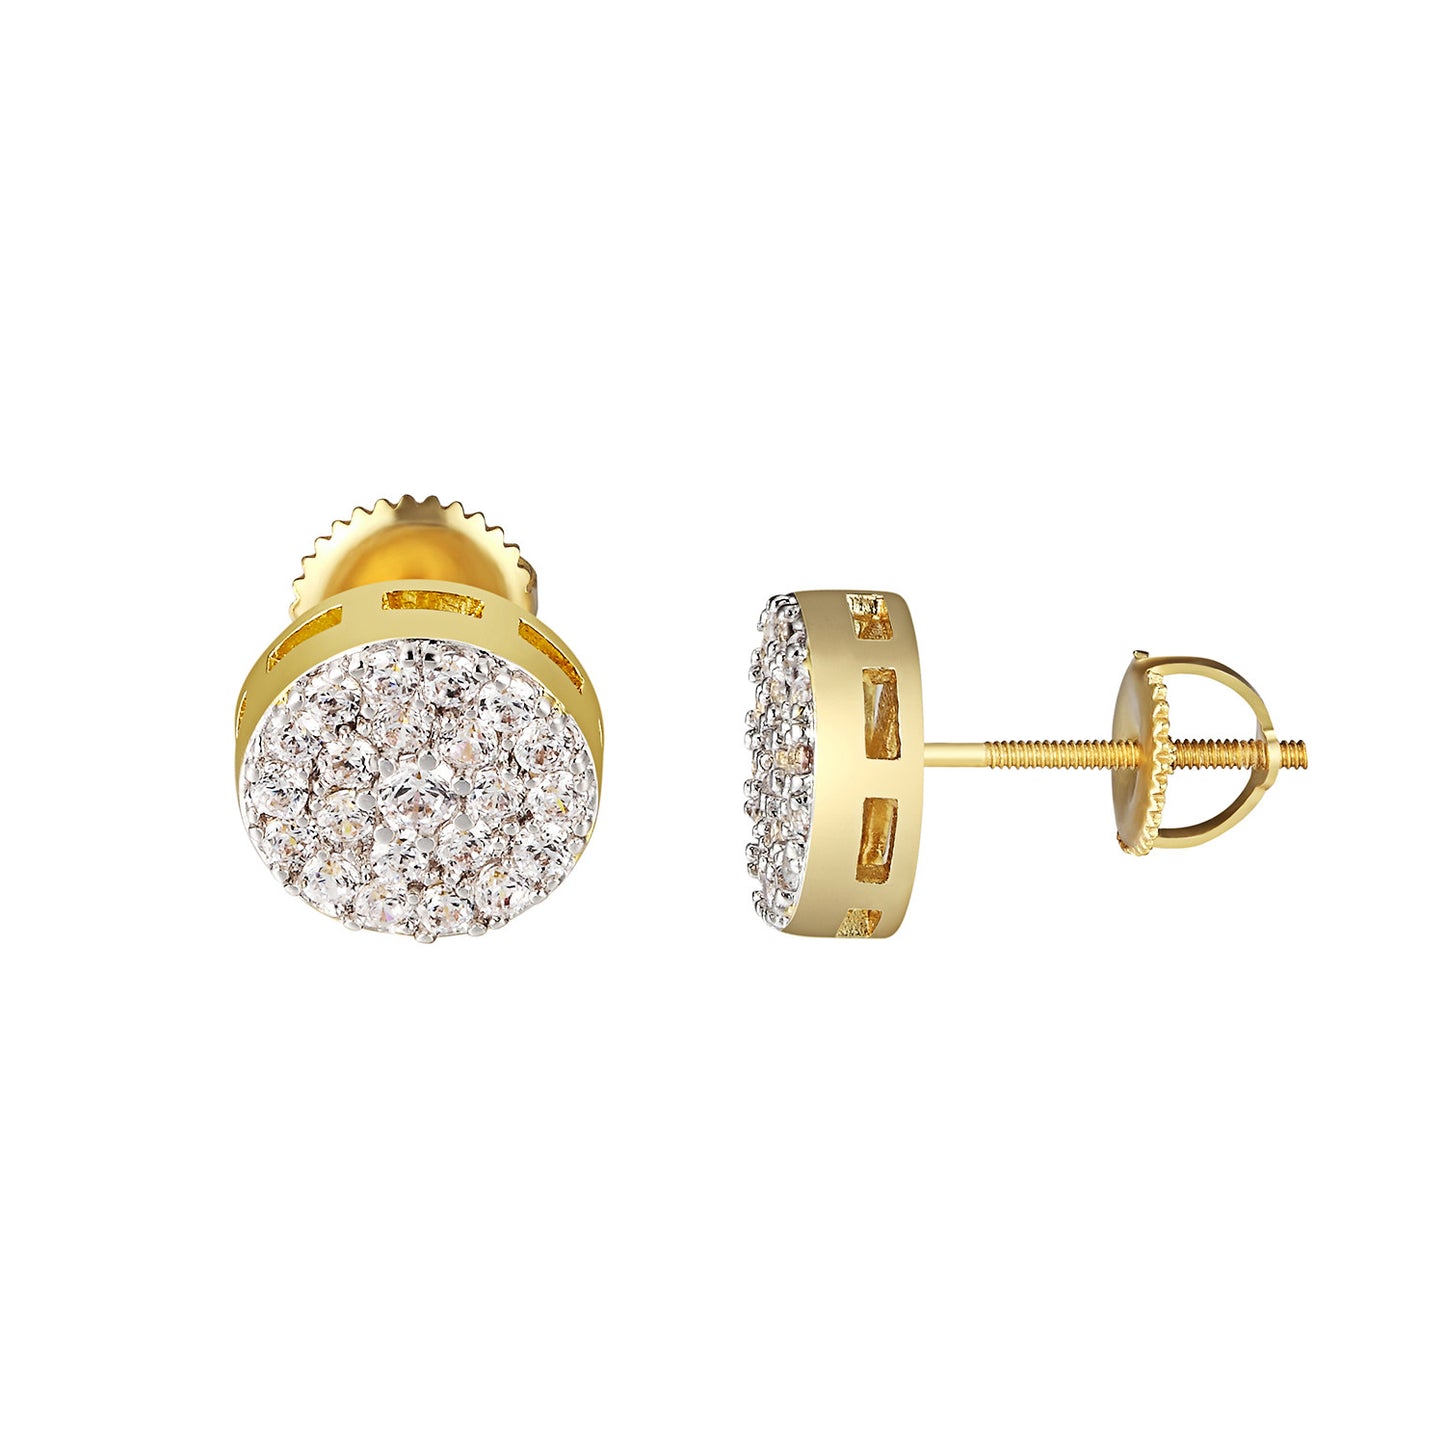 Cluster Set Round Earrings 14k Gold Finish Screw Back Simulated Diamonds Studs